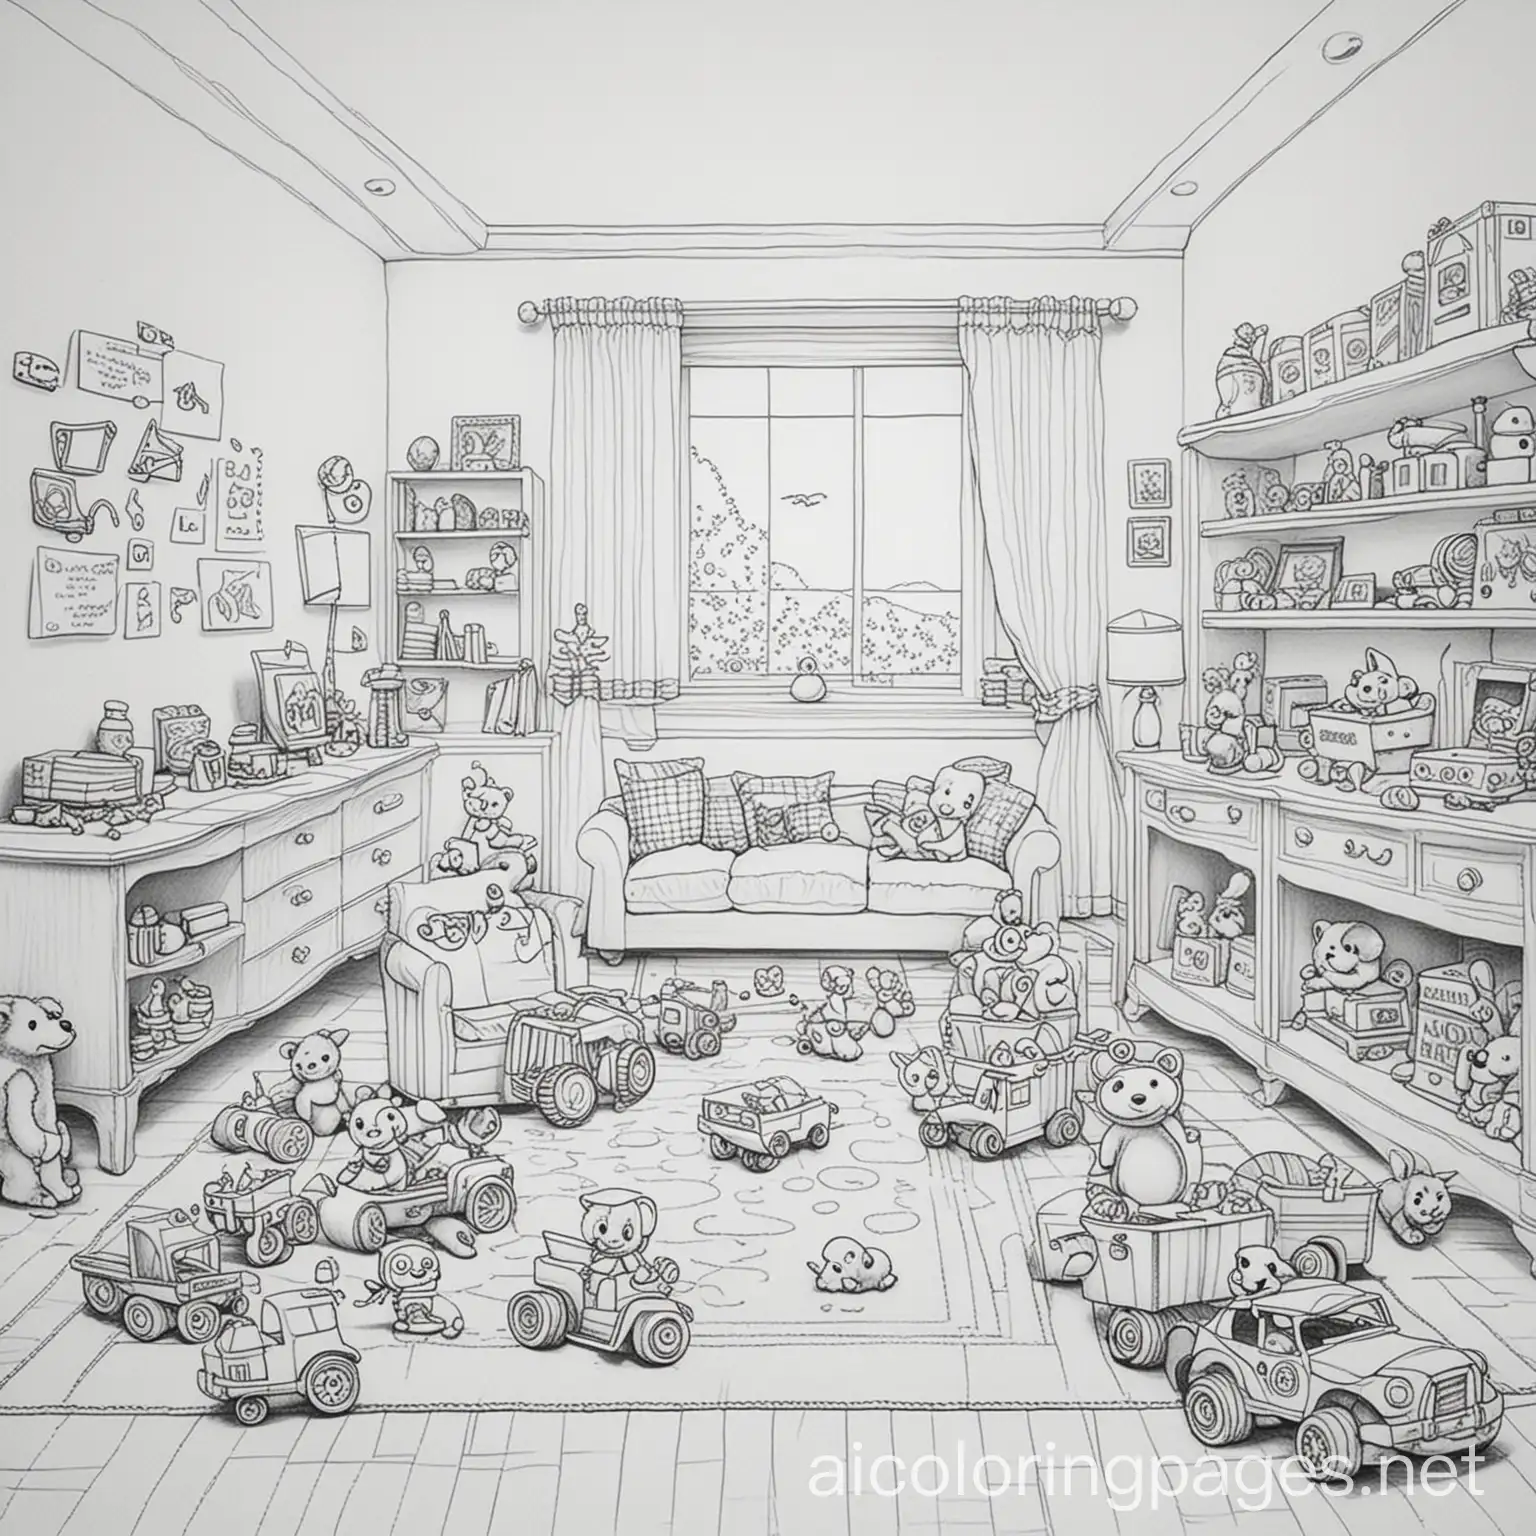 lots of toys in a room, Coloring Page, black and white, line art, white background, Simplicity, Ample White Space. The background of the coloring page is plain white to make it easy for young children to color within the lines. The outlines of all the subjects are easy to distinguish, making it simple for kids to color without too much difficulty